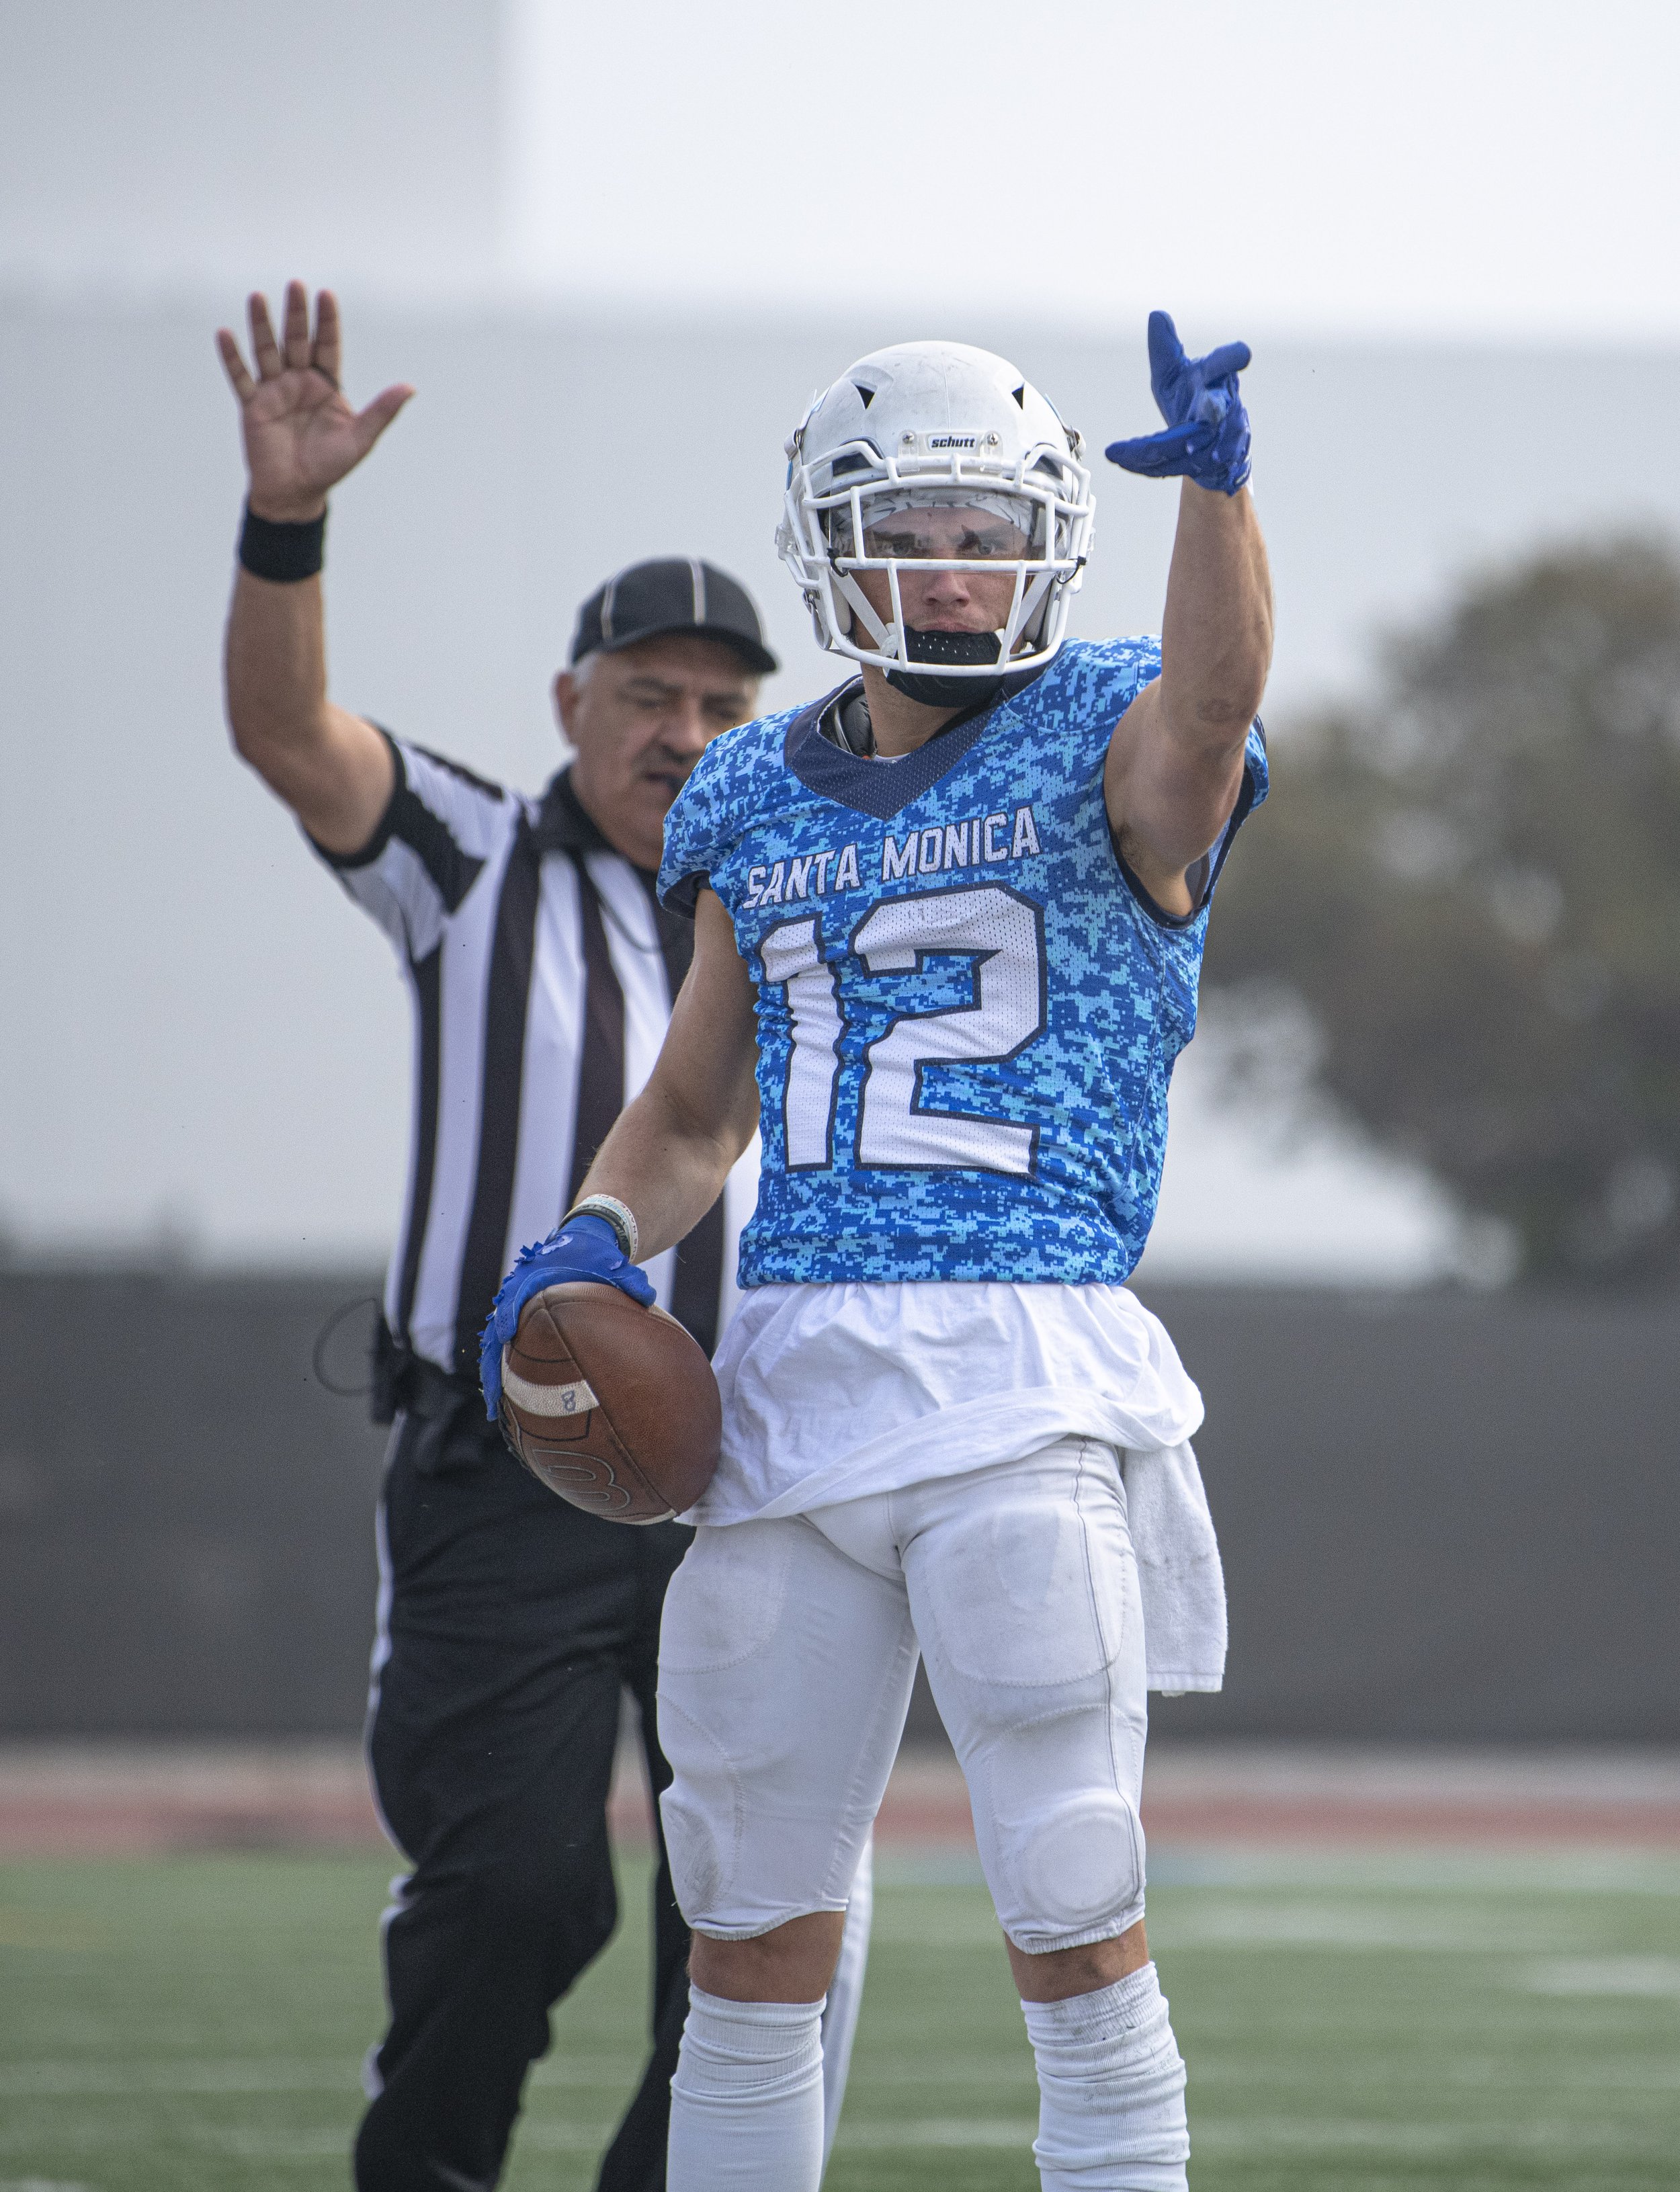  Santa Monica College Corsairs freshman WR Gunnison Bloodgood (12) signals for the first down after making an exceptional diving catch from the QB. (Jon Putman | The Corsair) 